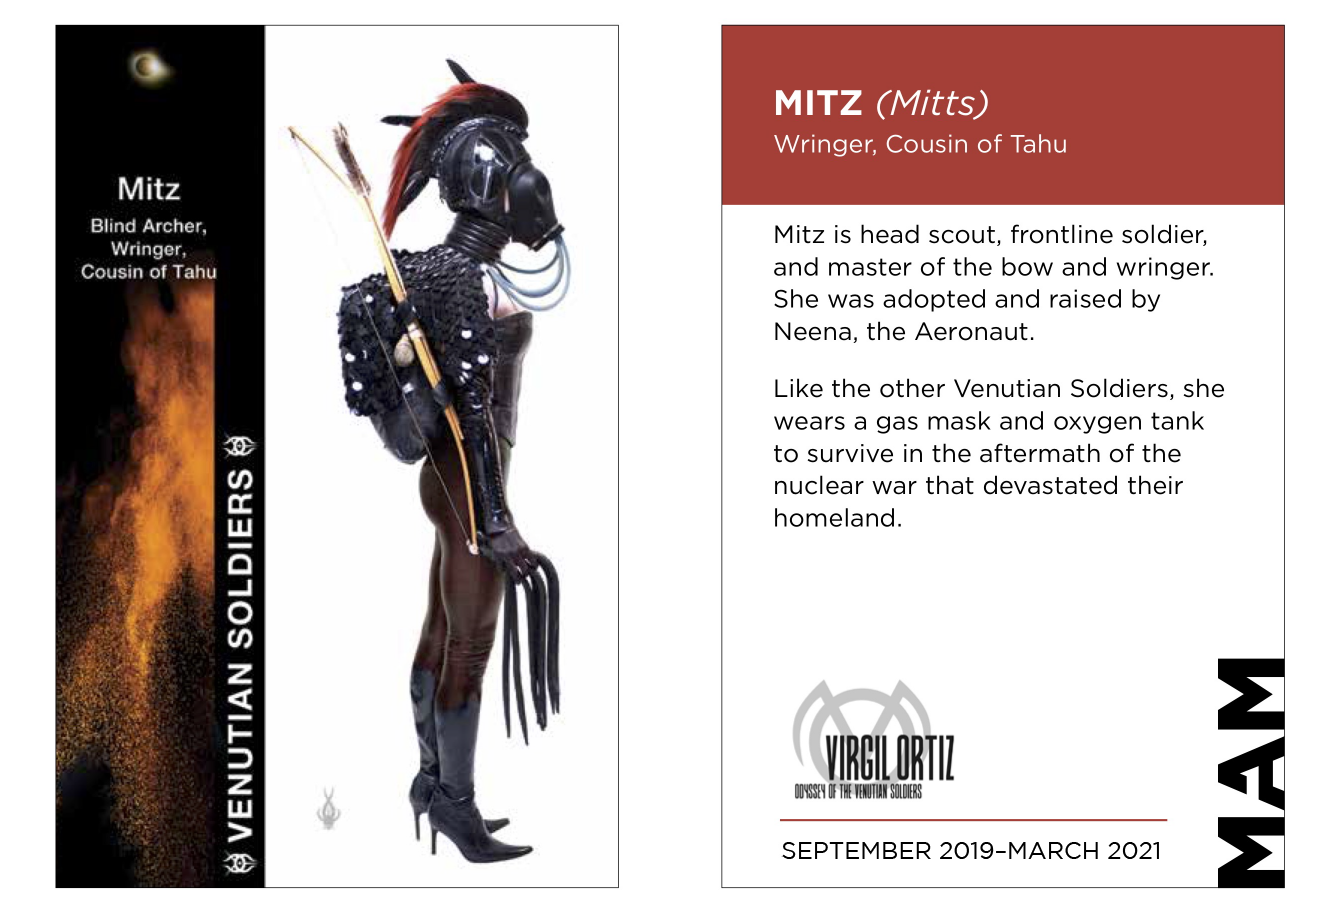 an information card about one of Virgil Ortiz's Venutian Soldiers.